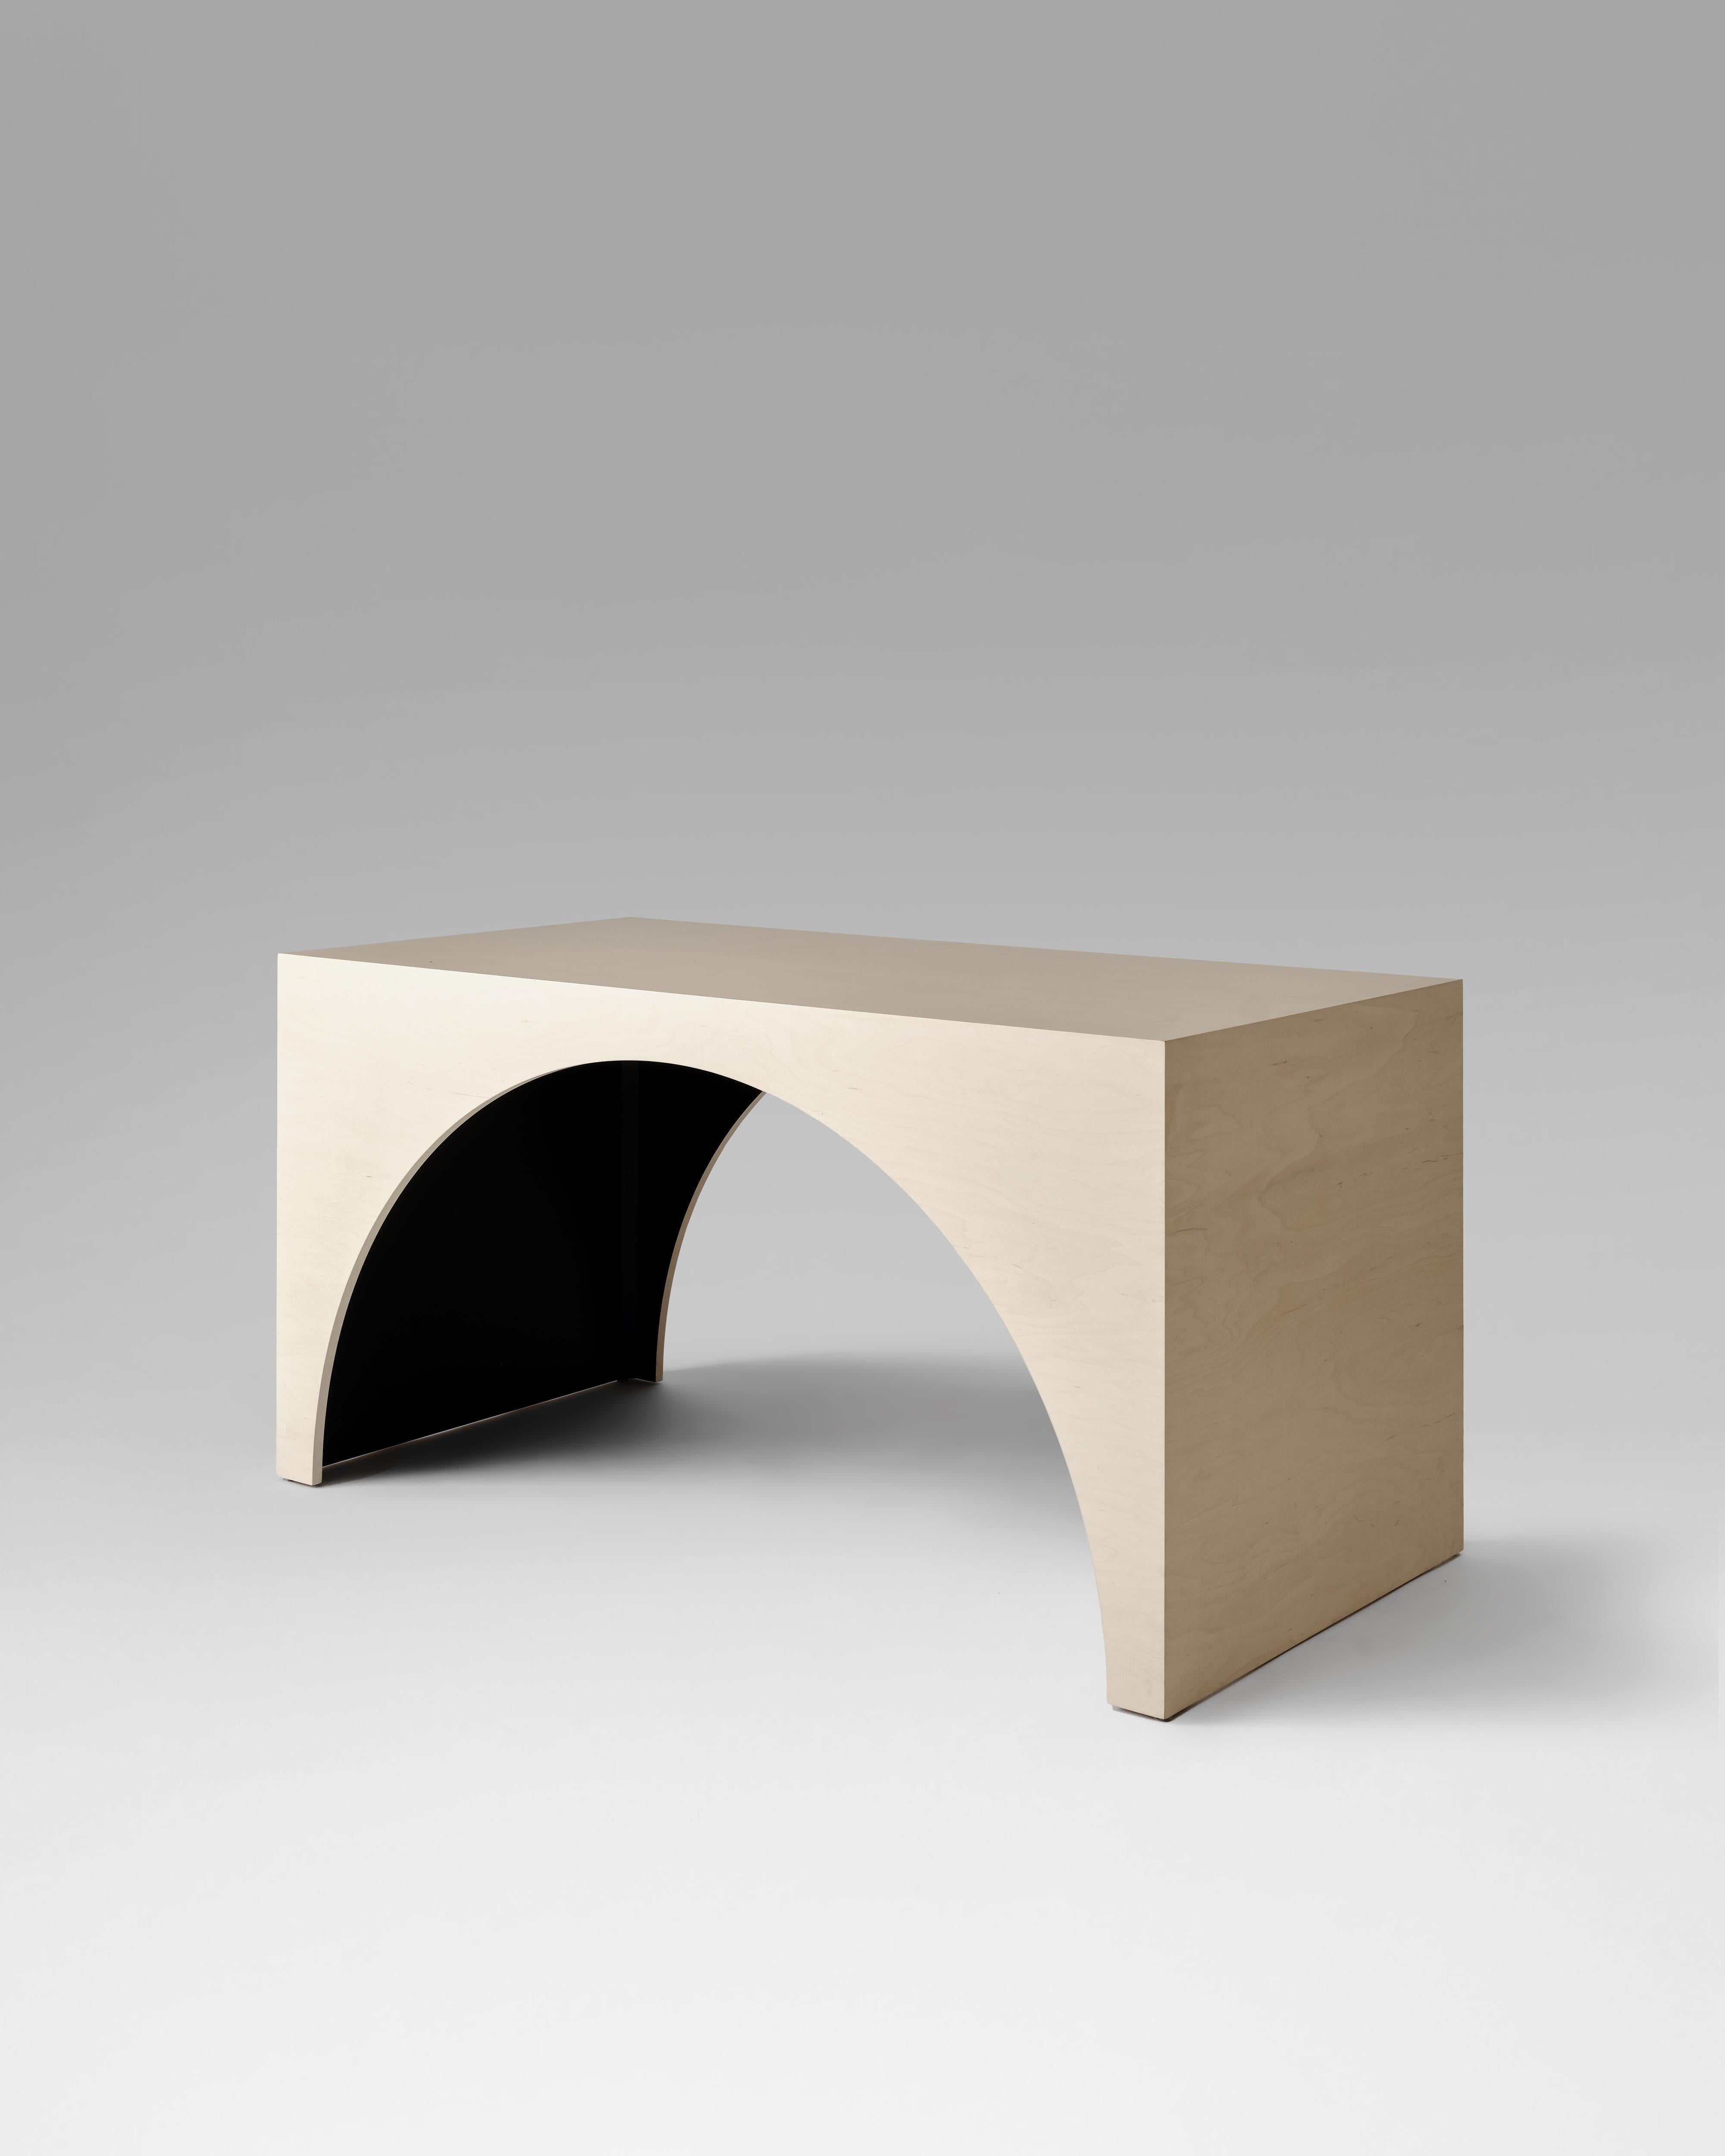 Arc desk made from wood with a bleached maple veneer finish and black stained interior.

Can also be used as a small dining table or wide console.

Designed and handmade in Los Angeles by Estudio Persona.